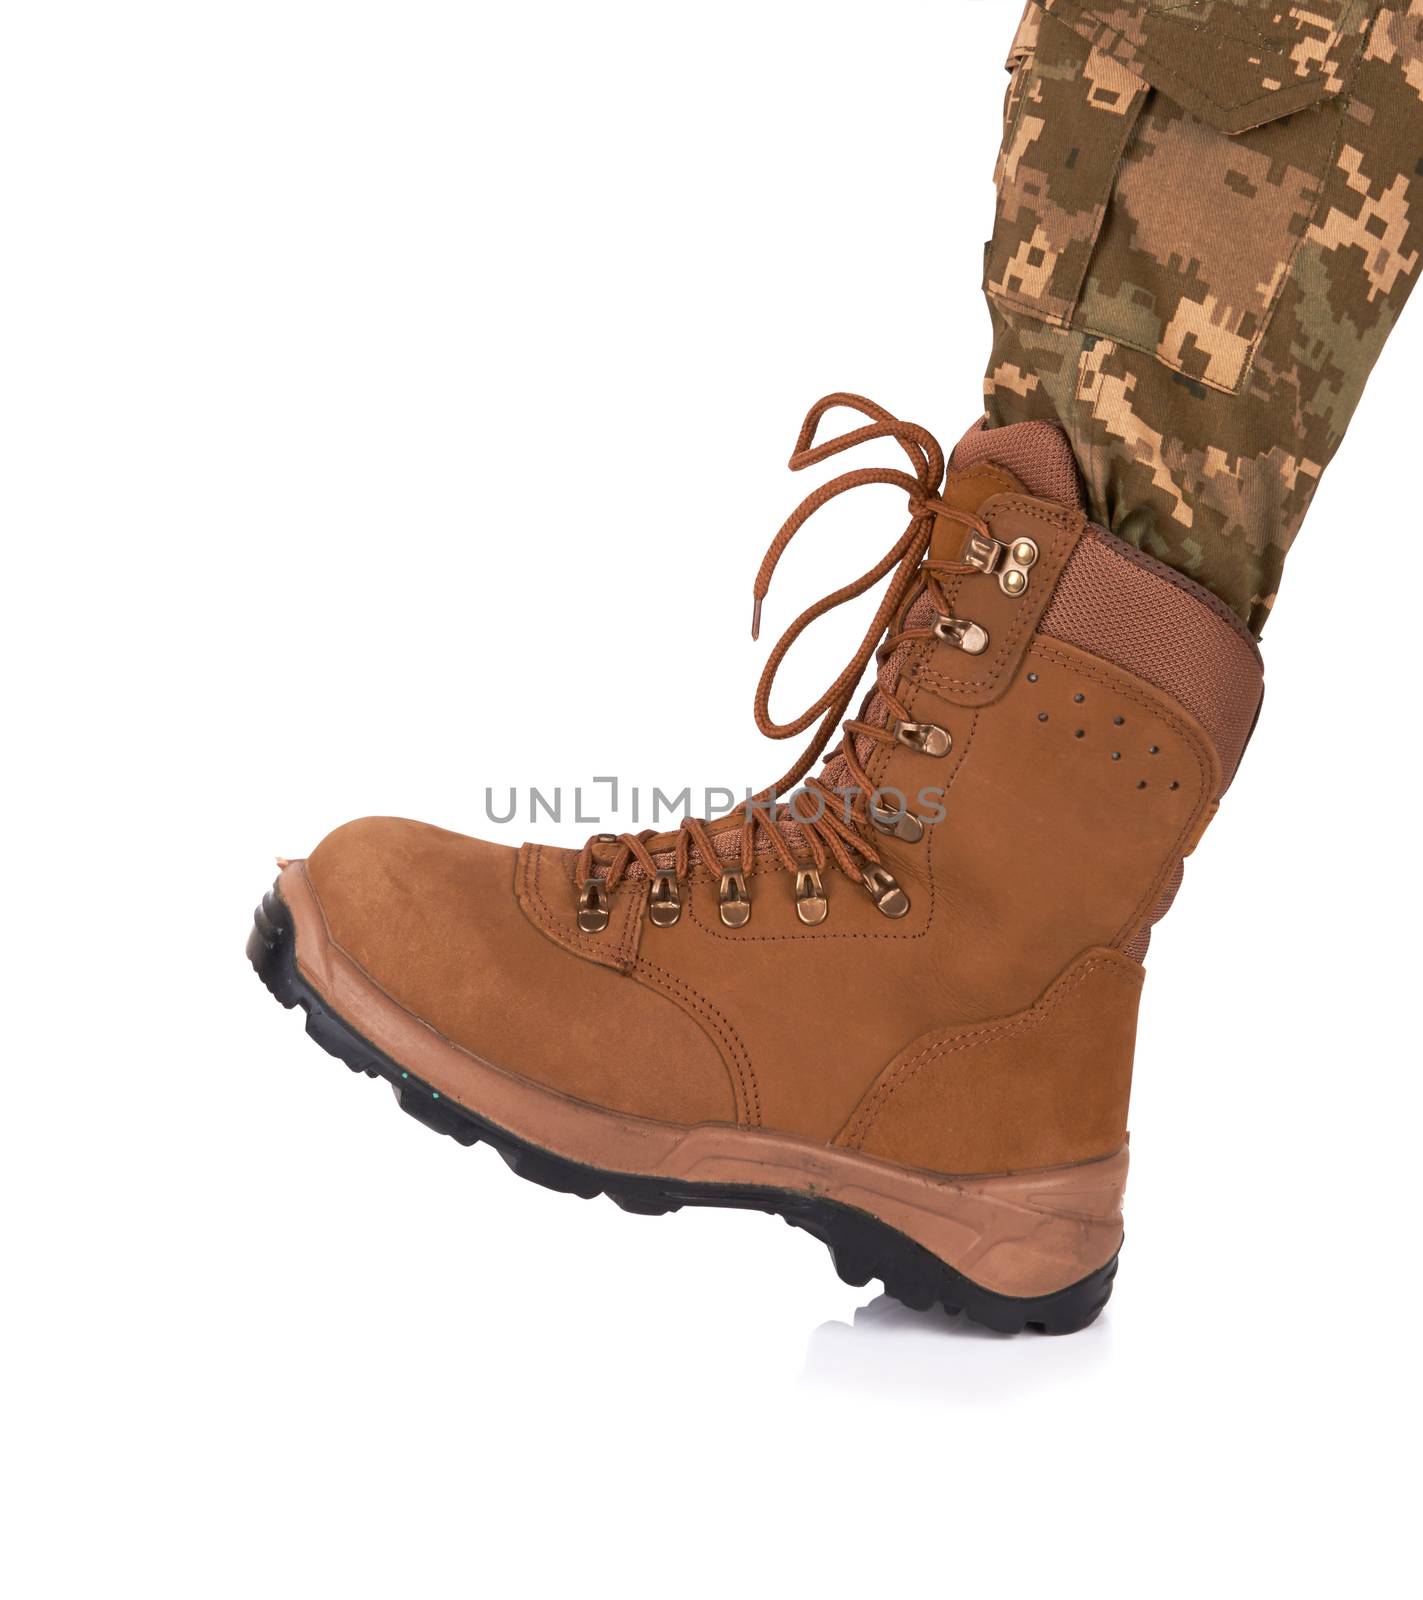 soldier leg in army boot isolated on white background